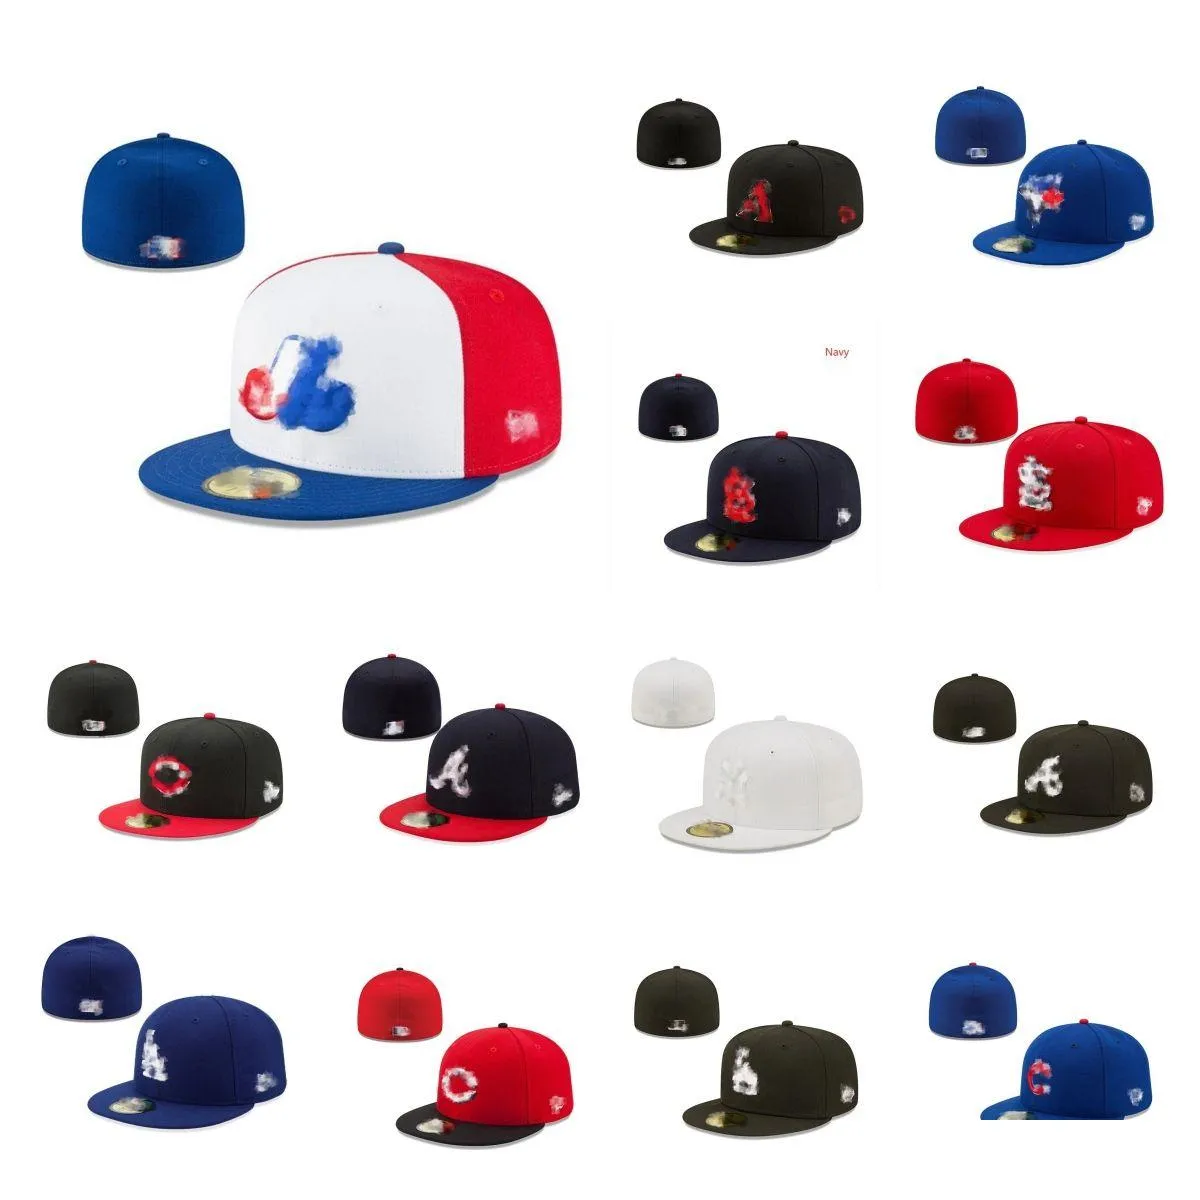 Unisex Outdoor Canada Expos Fitted Caps Fashion Hip Hop Size Hats Baseball Caps Adult Flat Peak For Men Women Full Closed